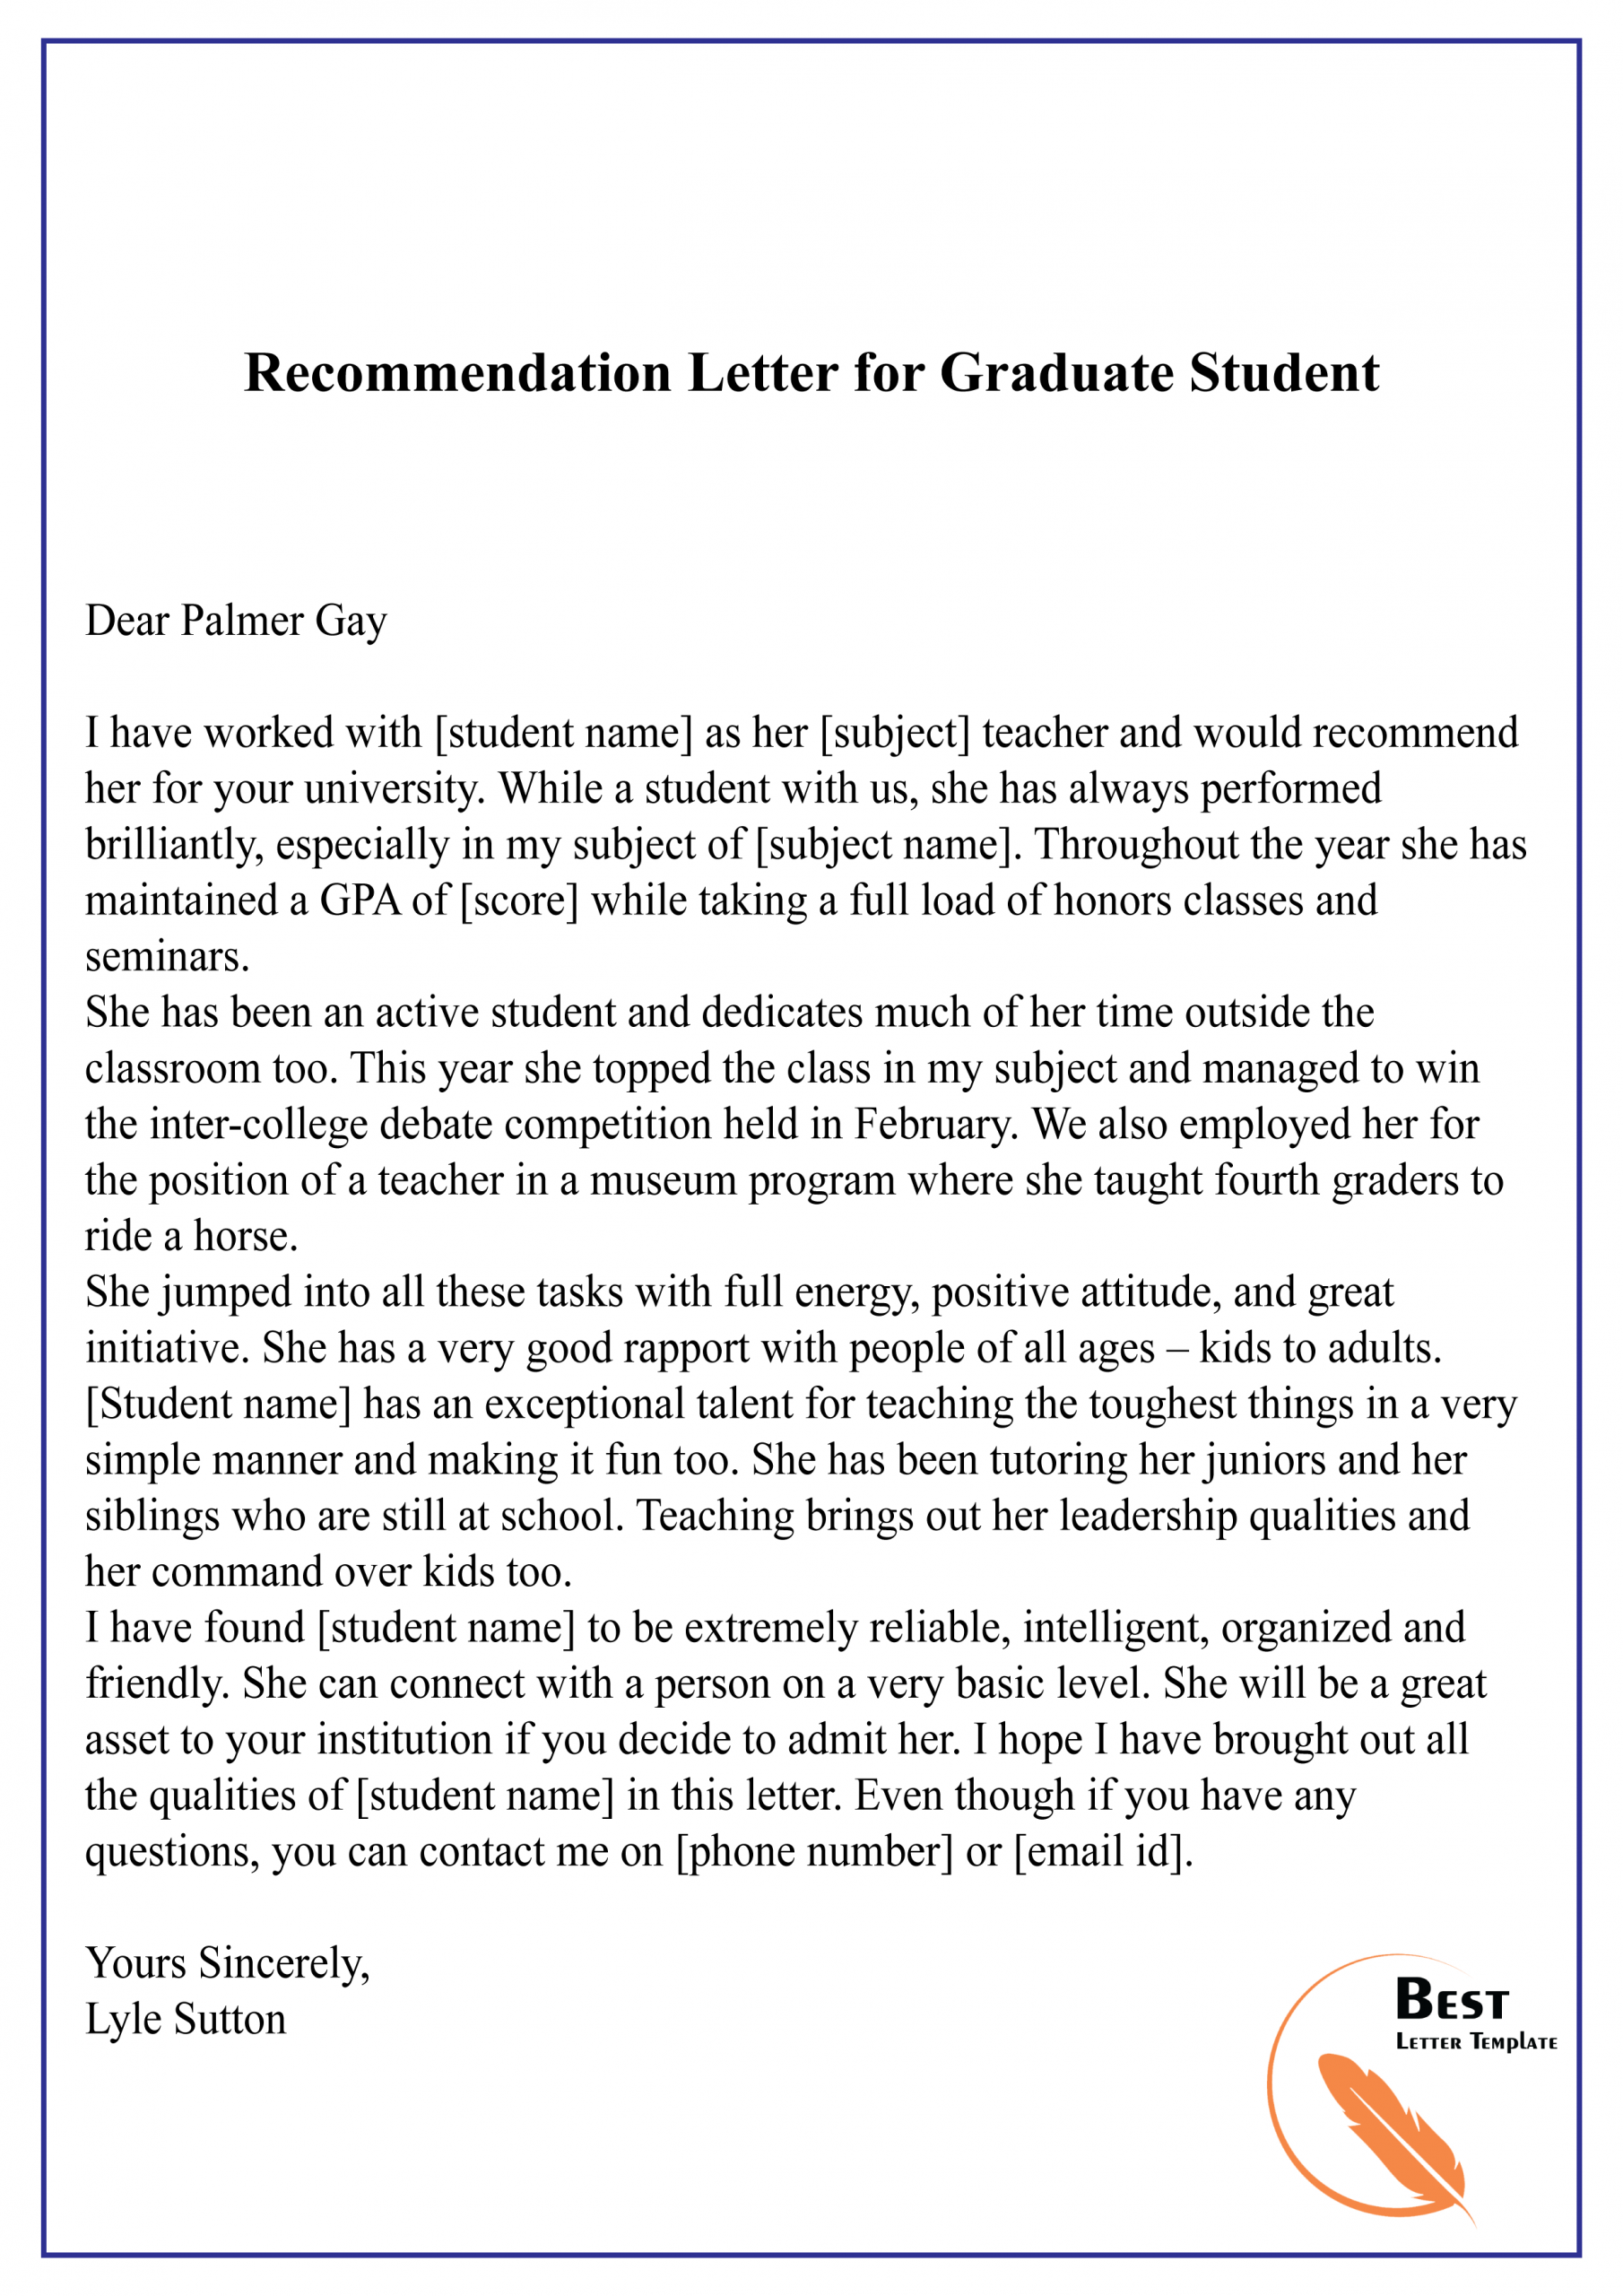 phd recommendation letter